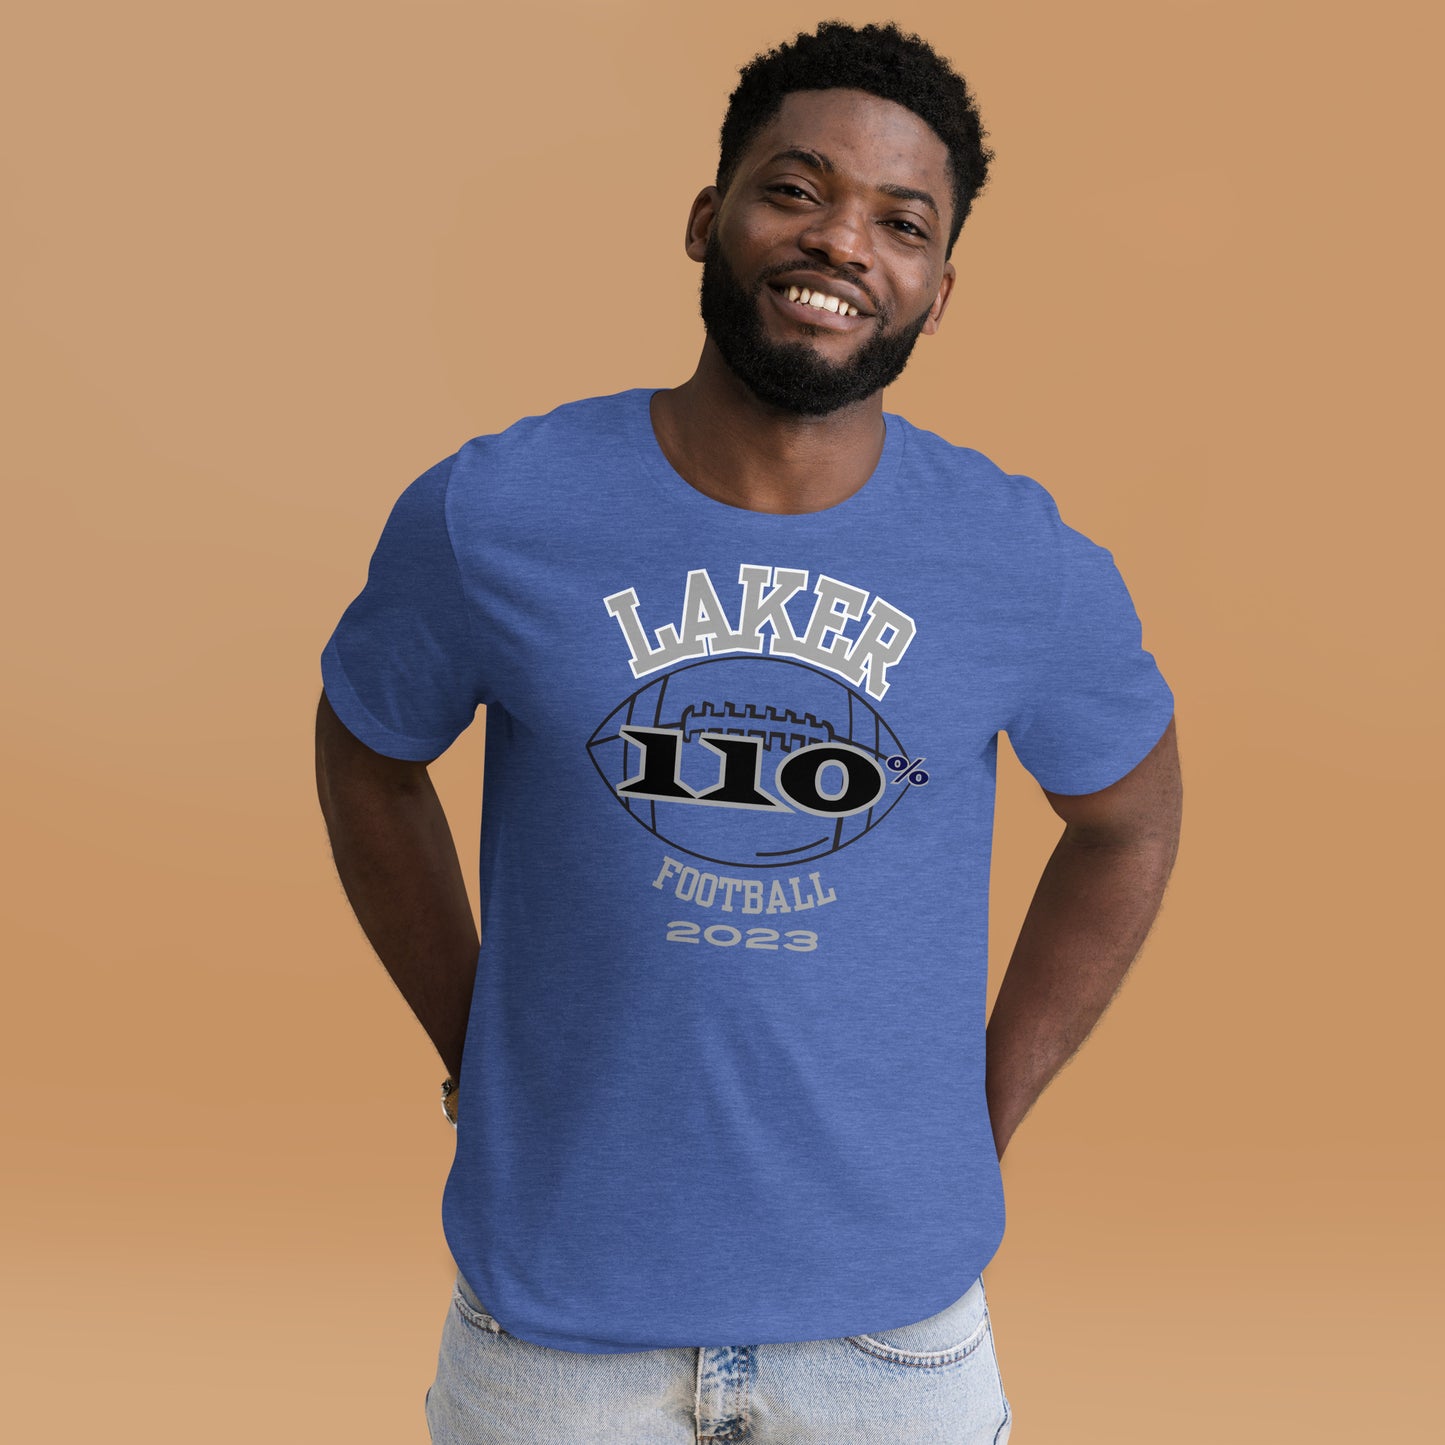 Our Lady of the Lakes HS football t-shirt